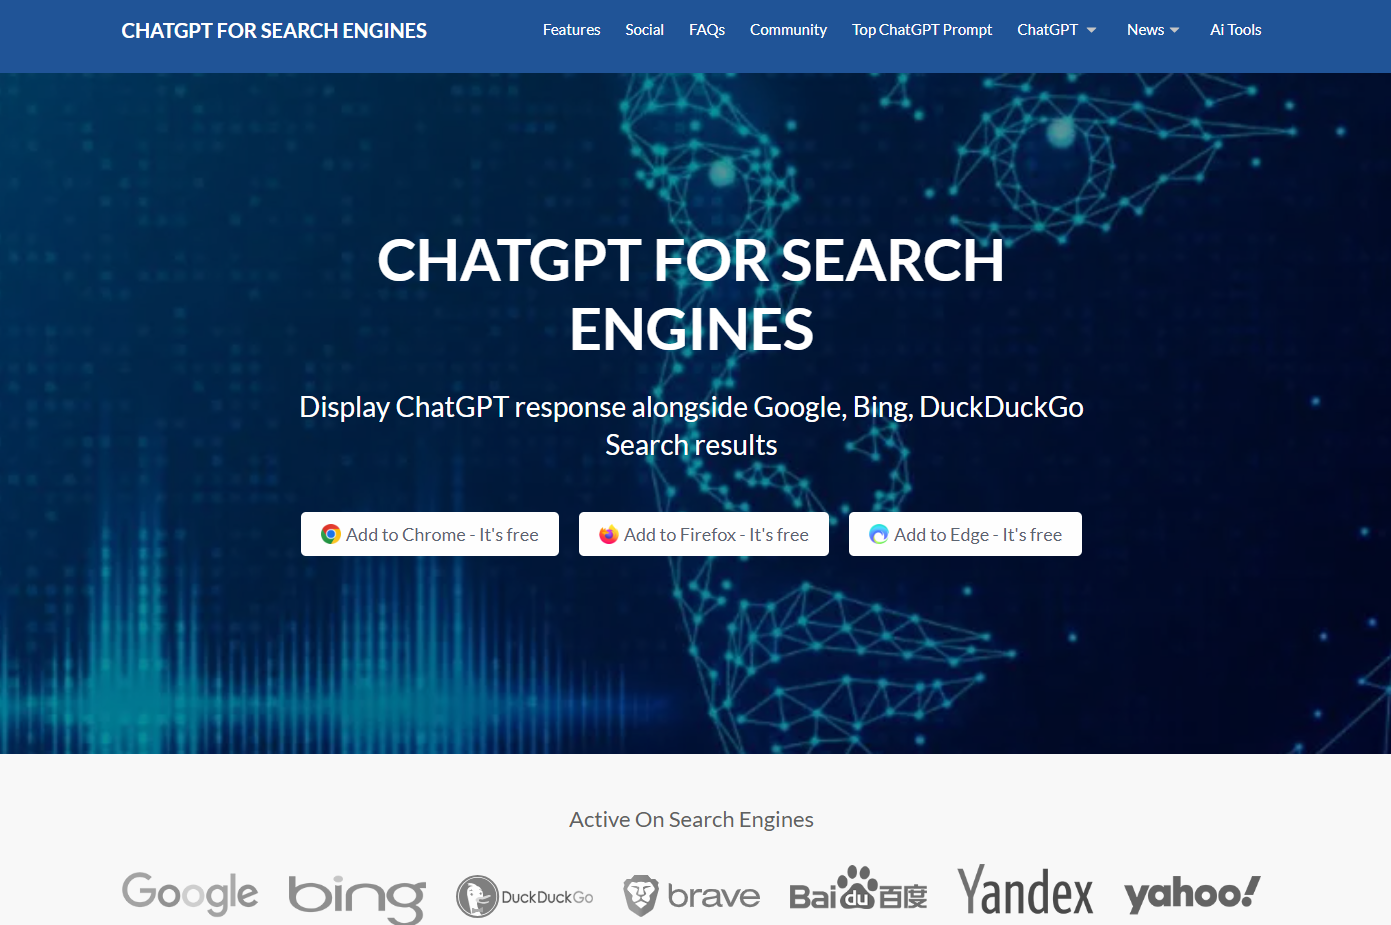 CHATGPT FOR SEARCH ENGINES